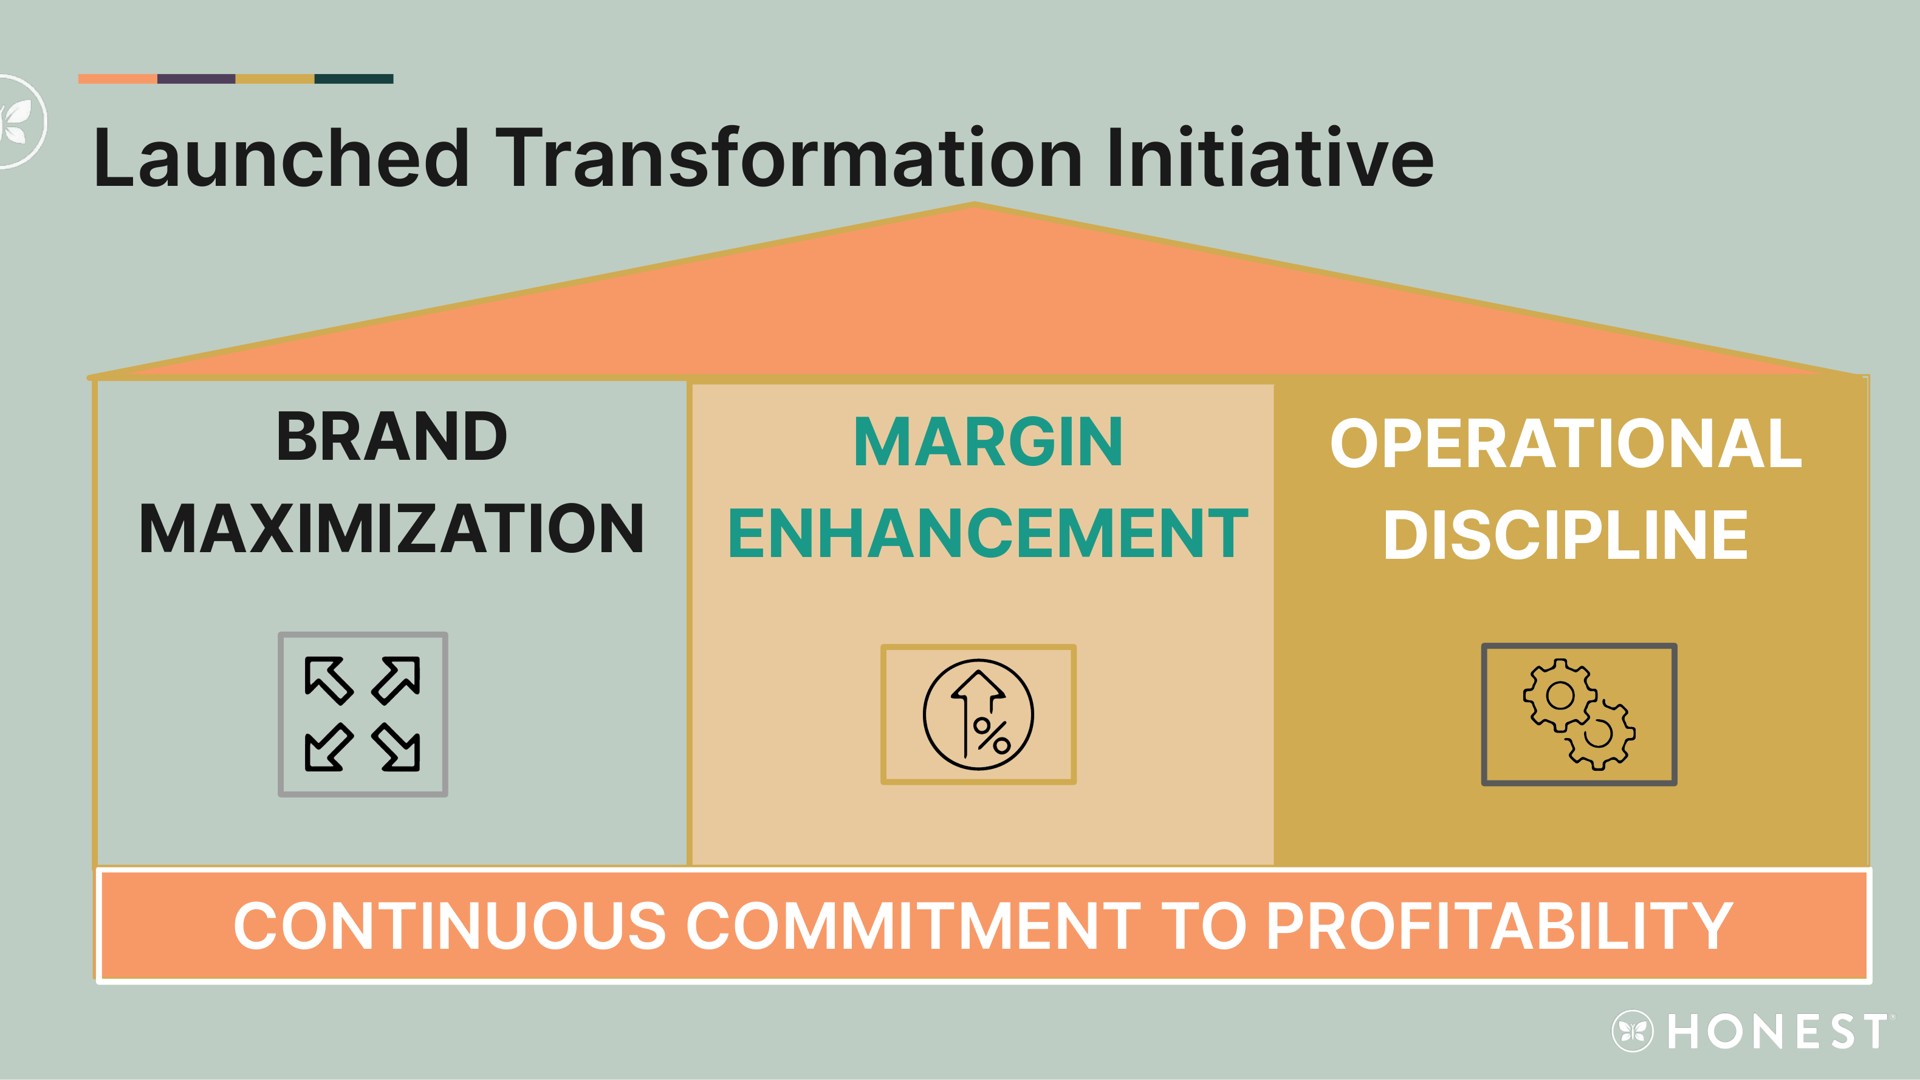 launched transformation initiative | Honest